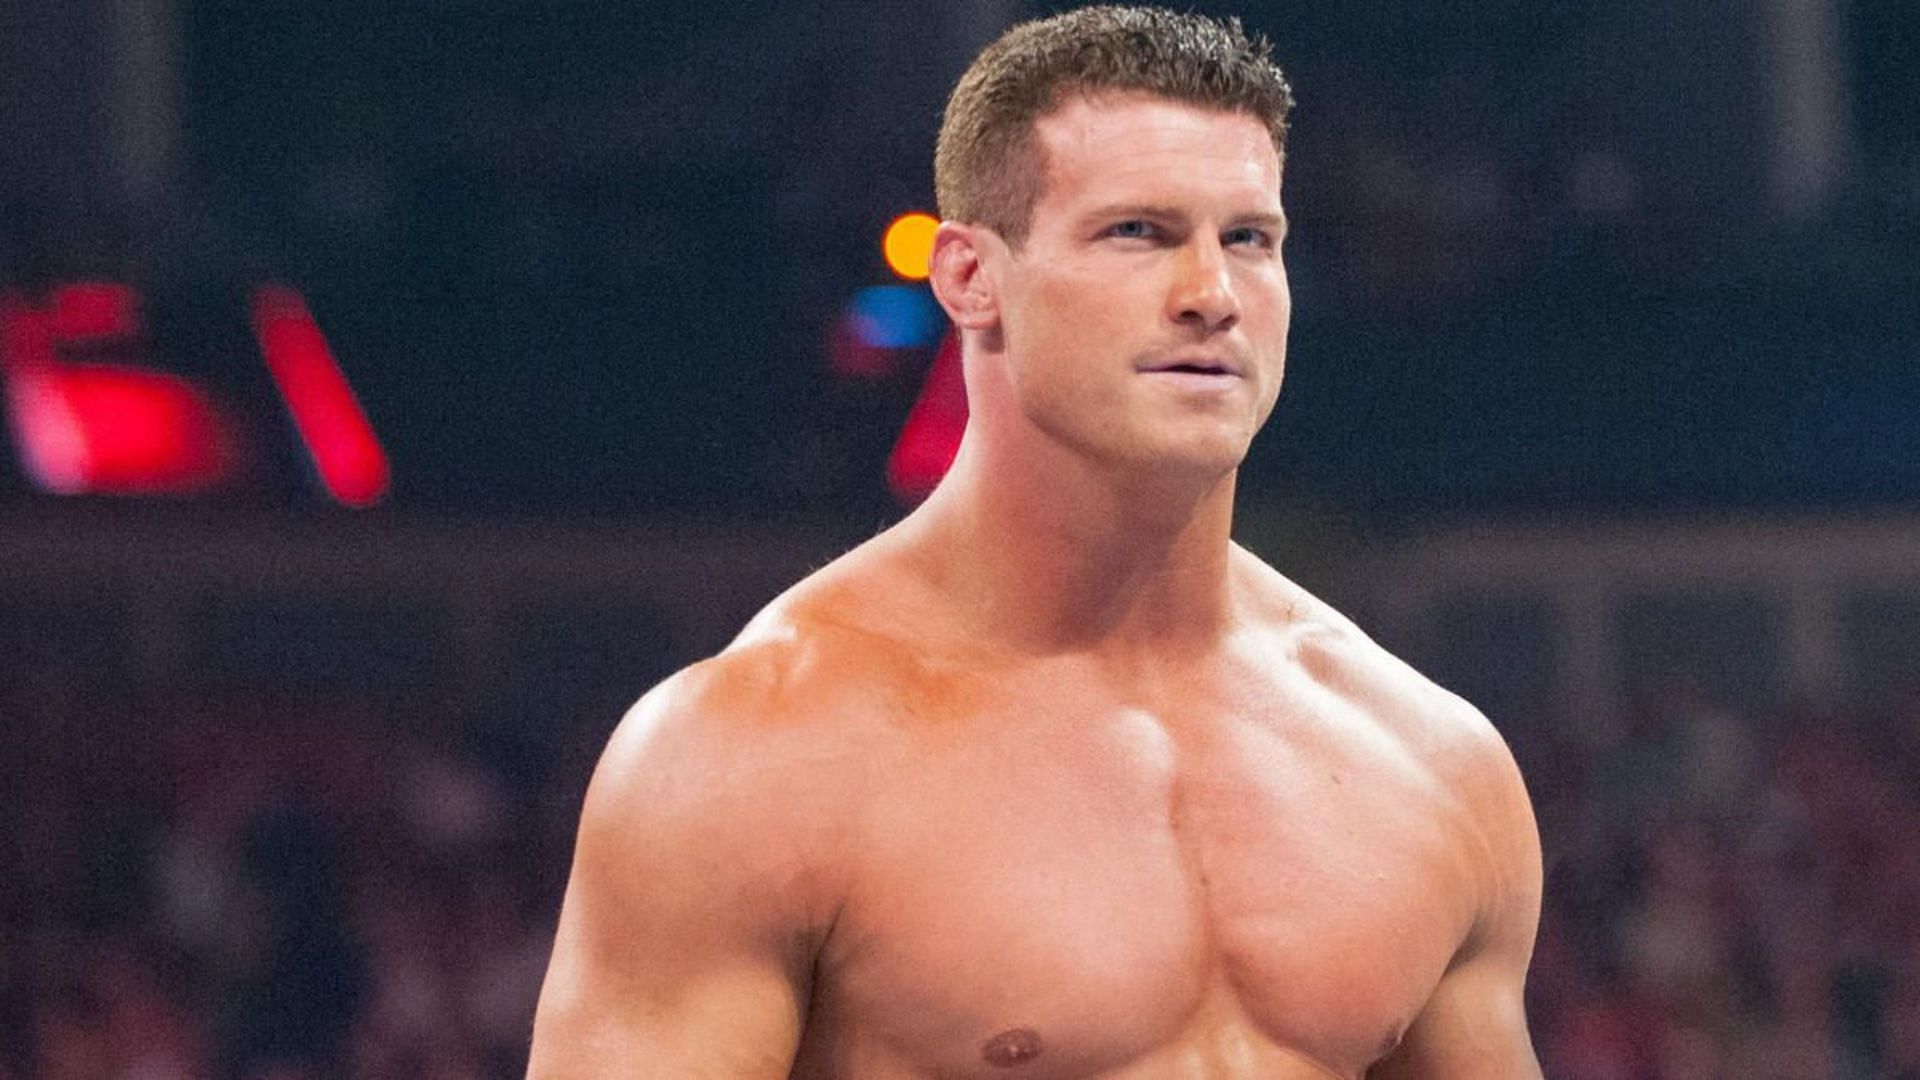 Dolph Ziggler did not want to change his hair color